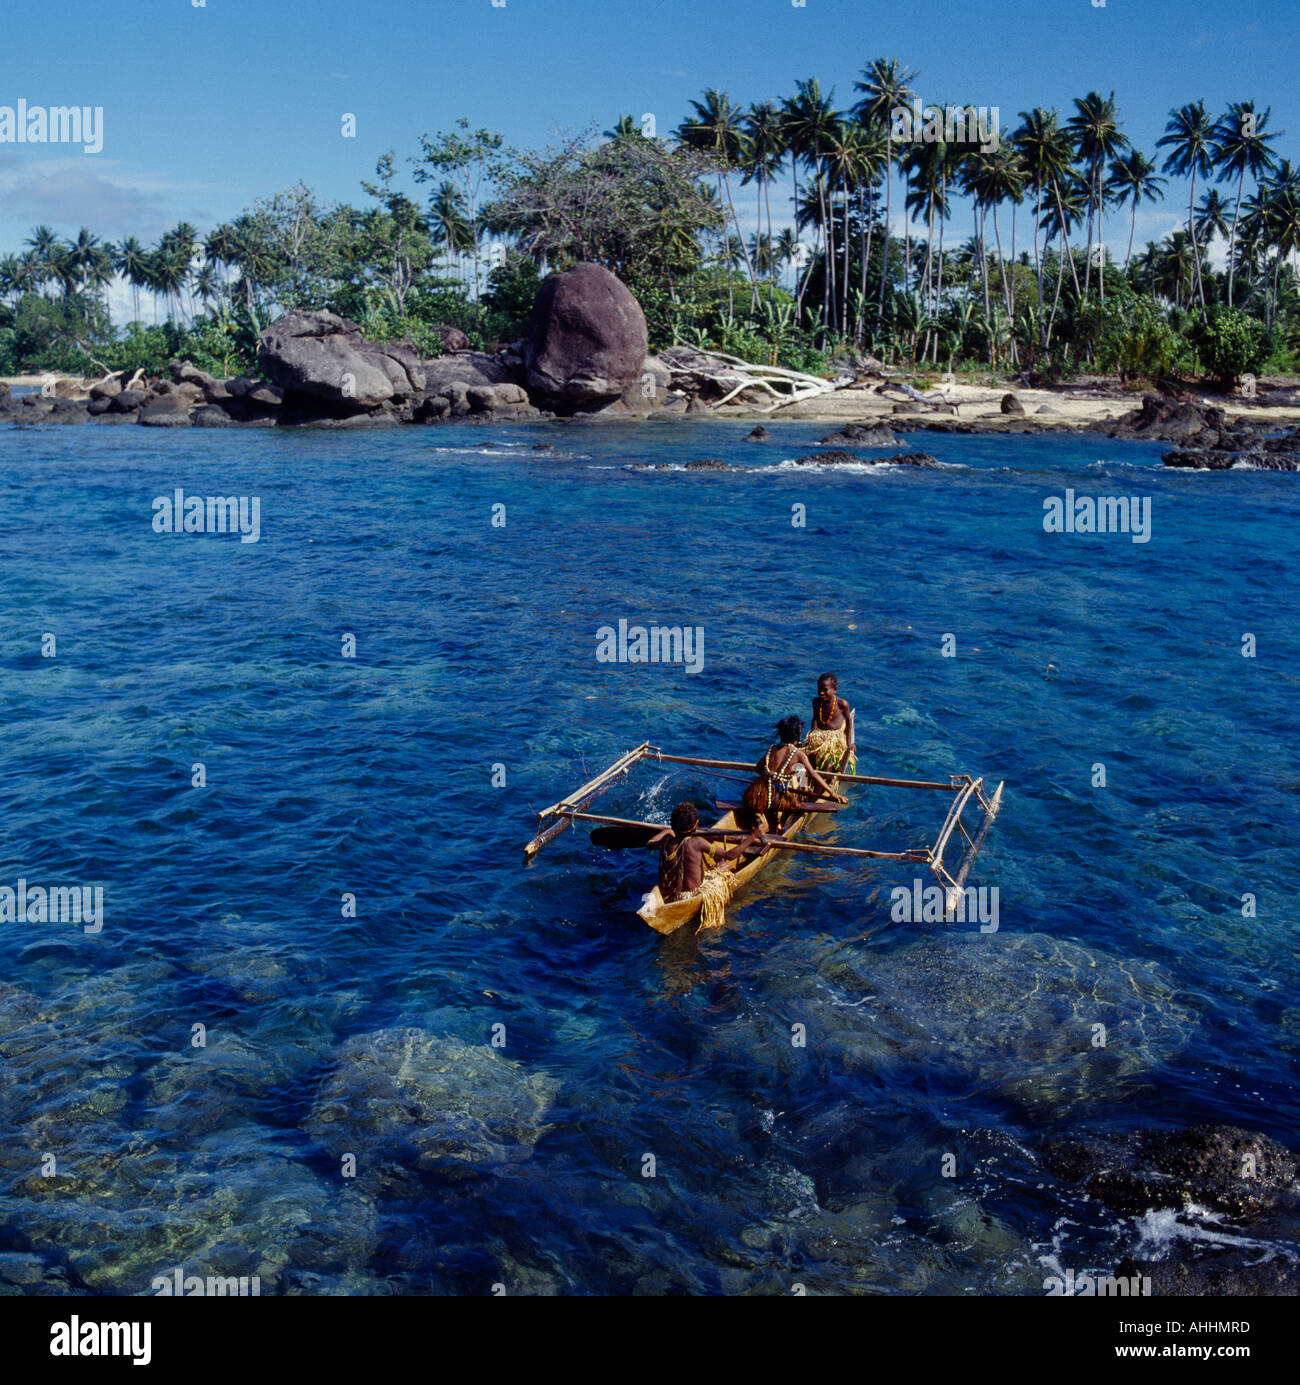 INDONESIA Asia Irian Jaya Sorong Children in outrigger canoe on clear blue water among rocks close to coconut tree lined shore. Stock Photo